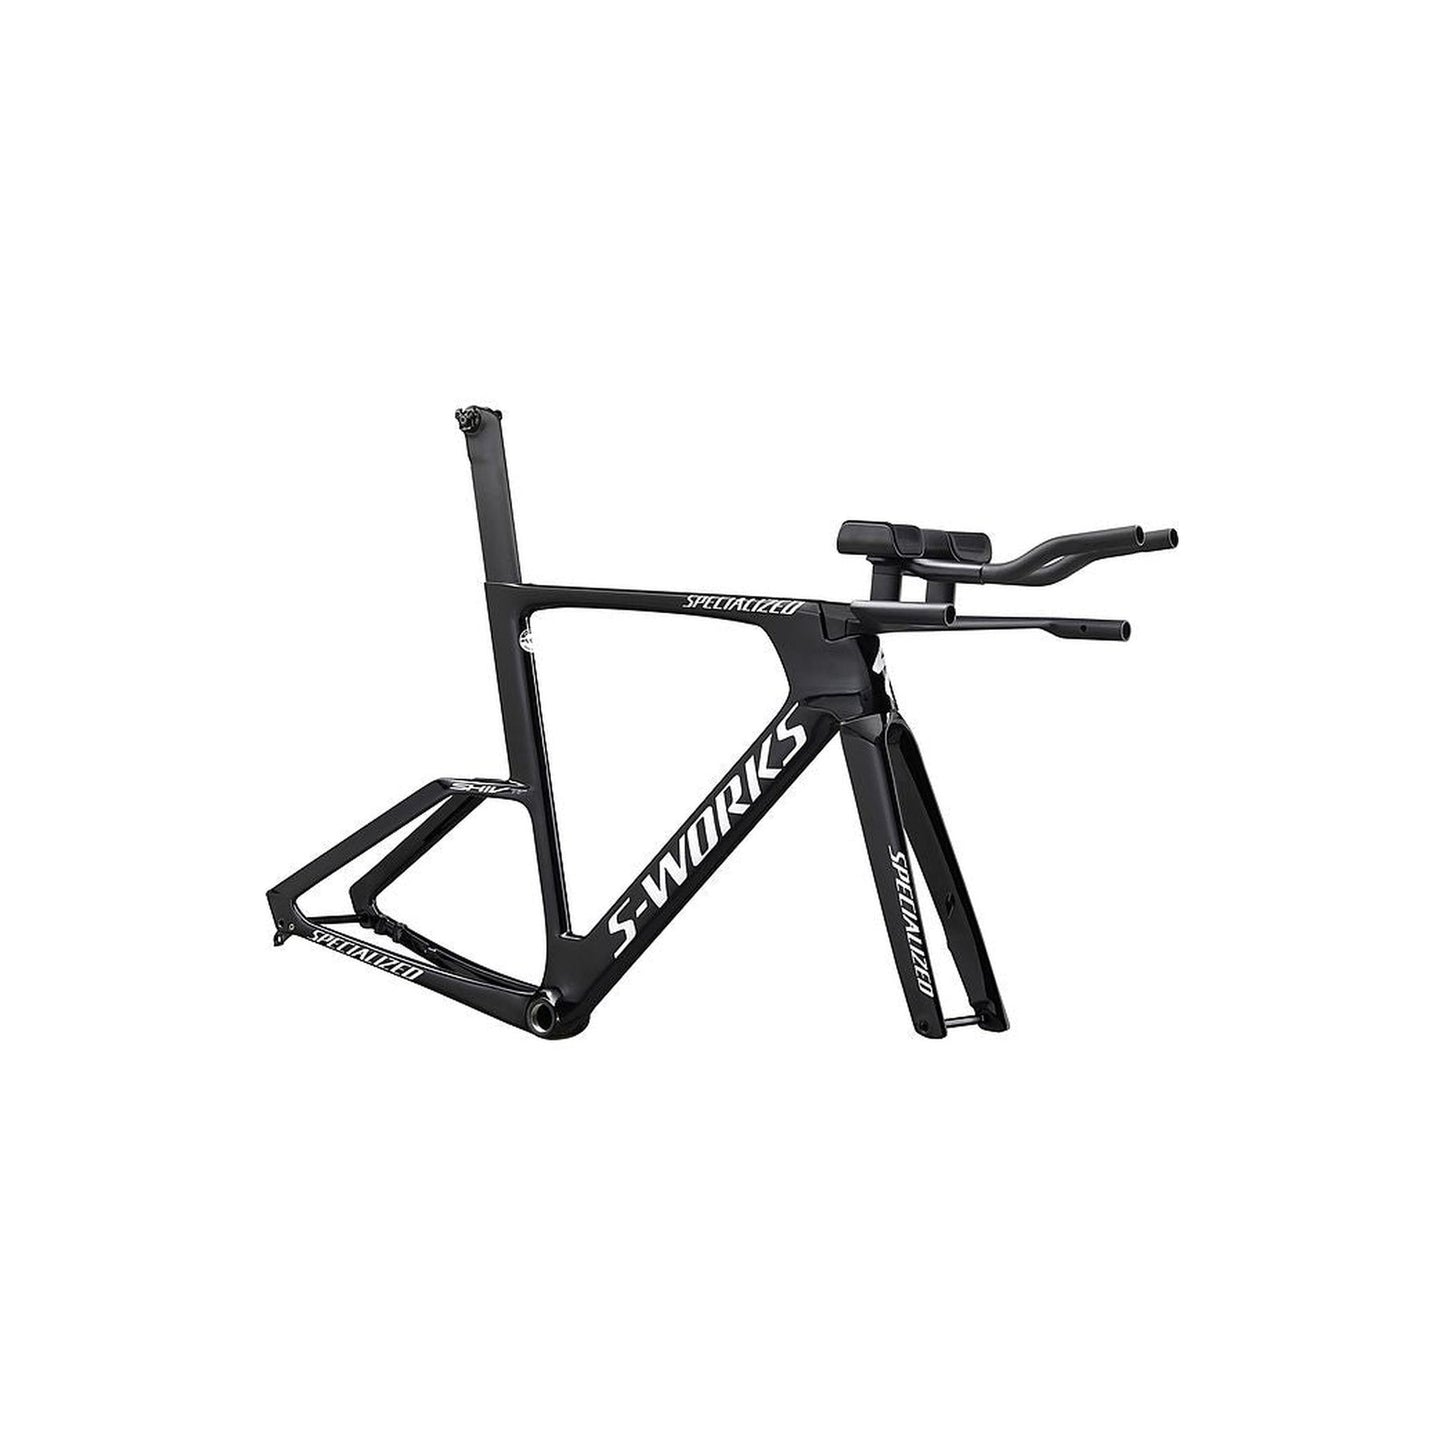 S-Works Shiv TT Disc Module | completecyclist - For years, time trial bikes have had very similar attributesÑskinny, deep airfoils, sketchy handling, subpar braking, and heavy frames. '' For the ""flat and